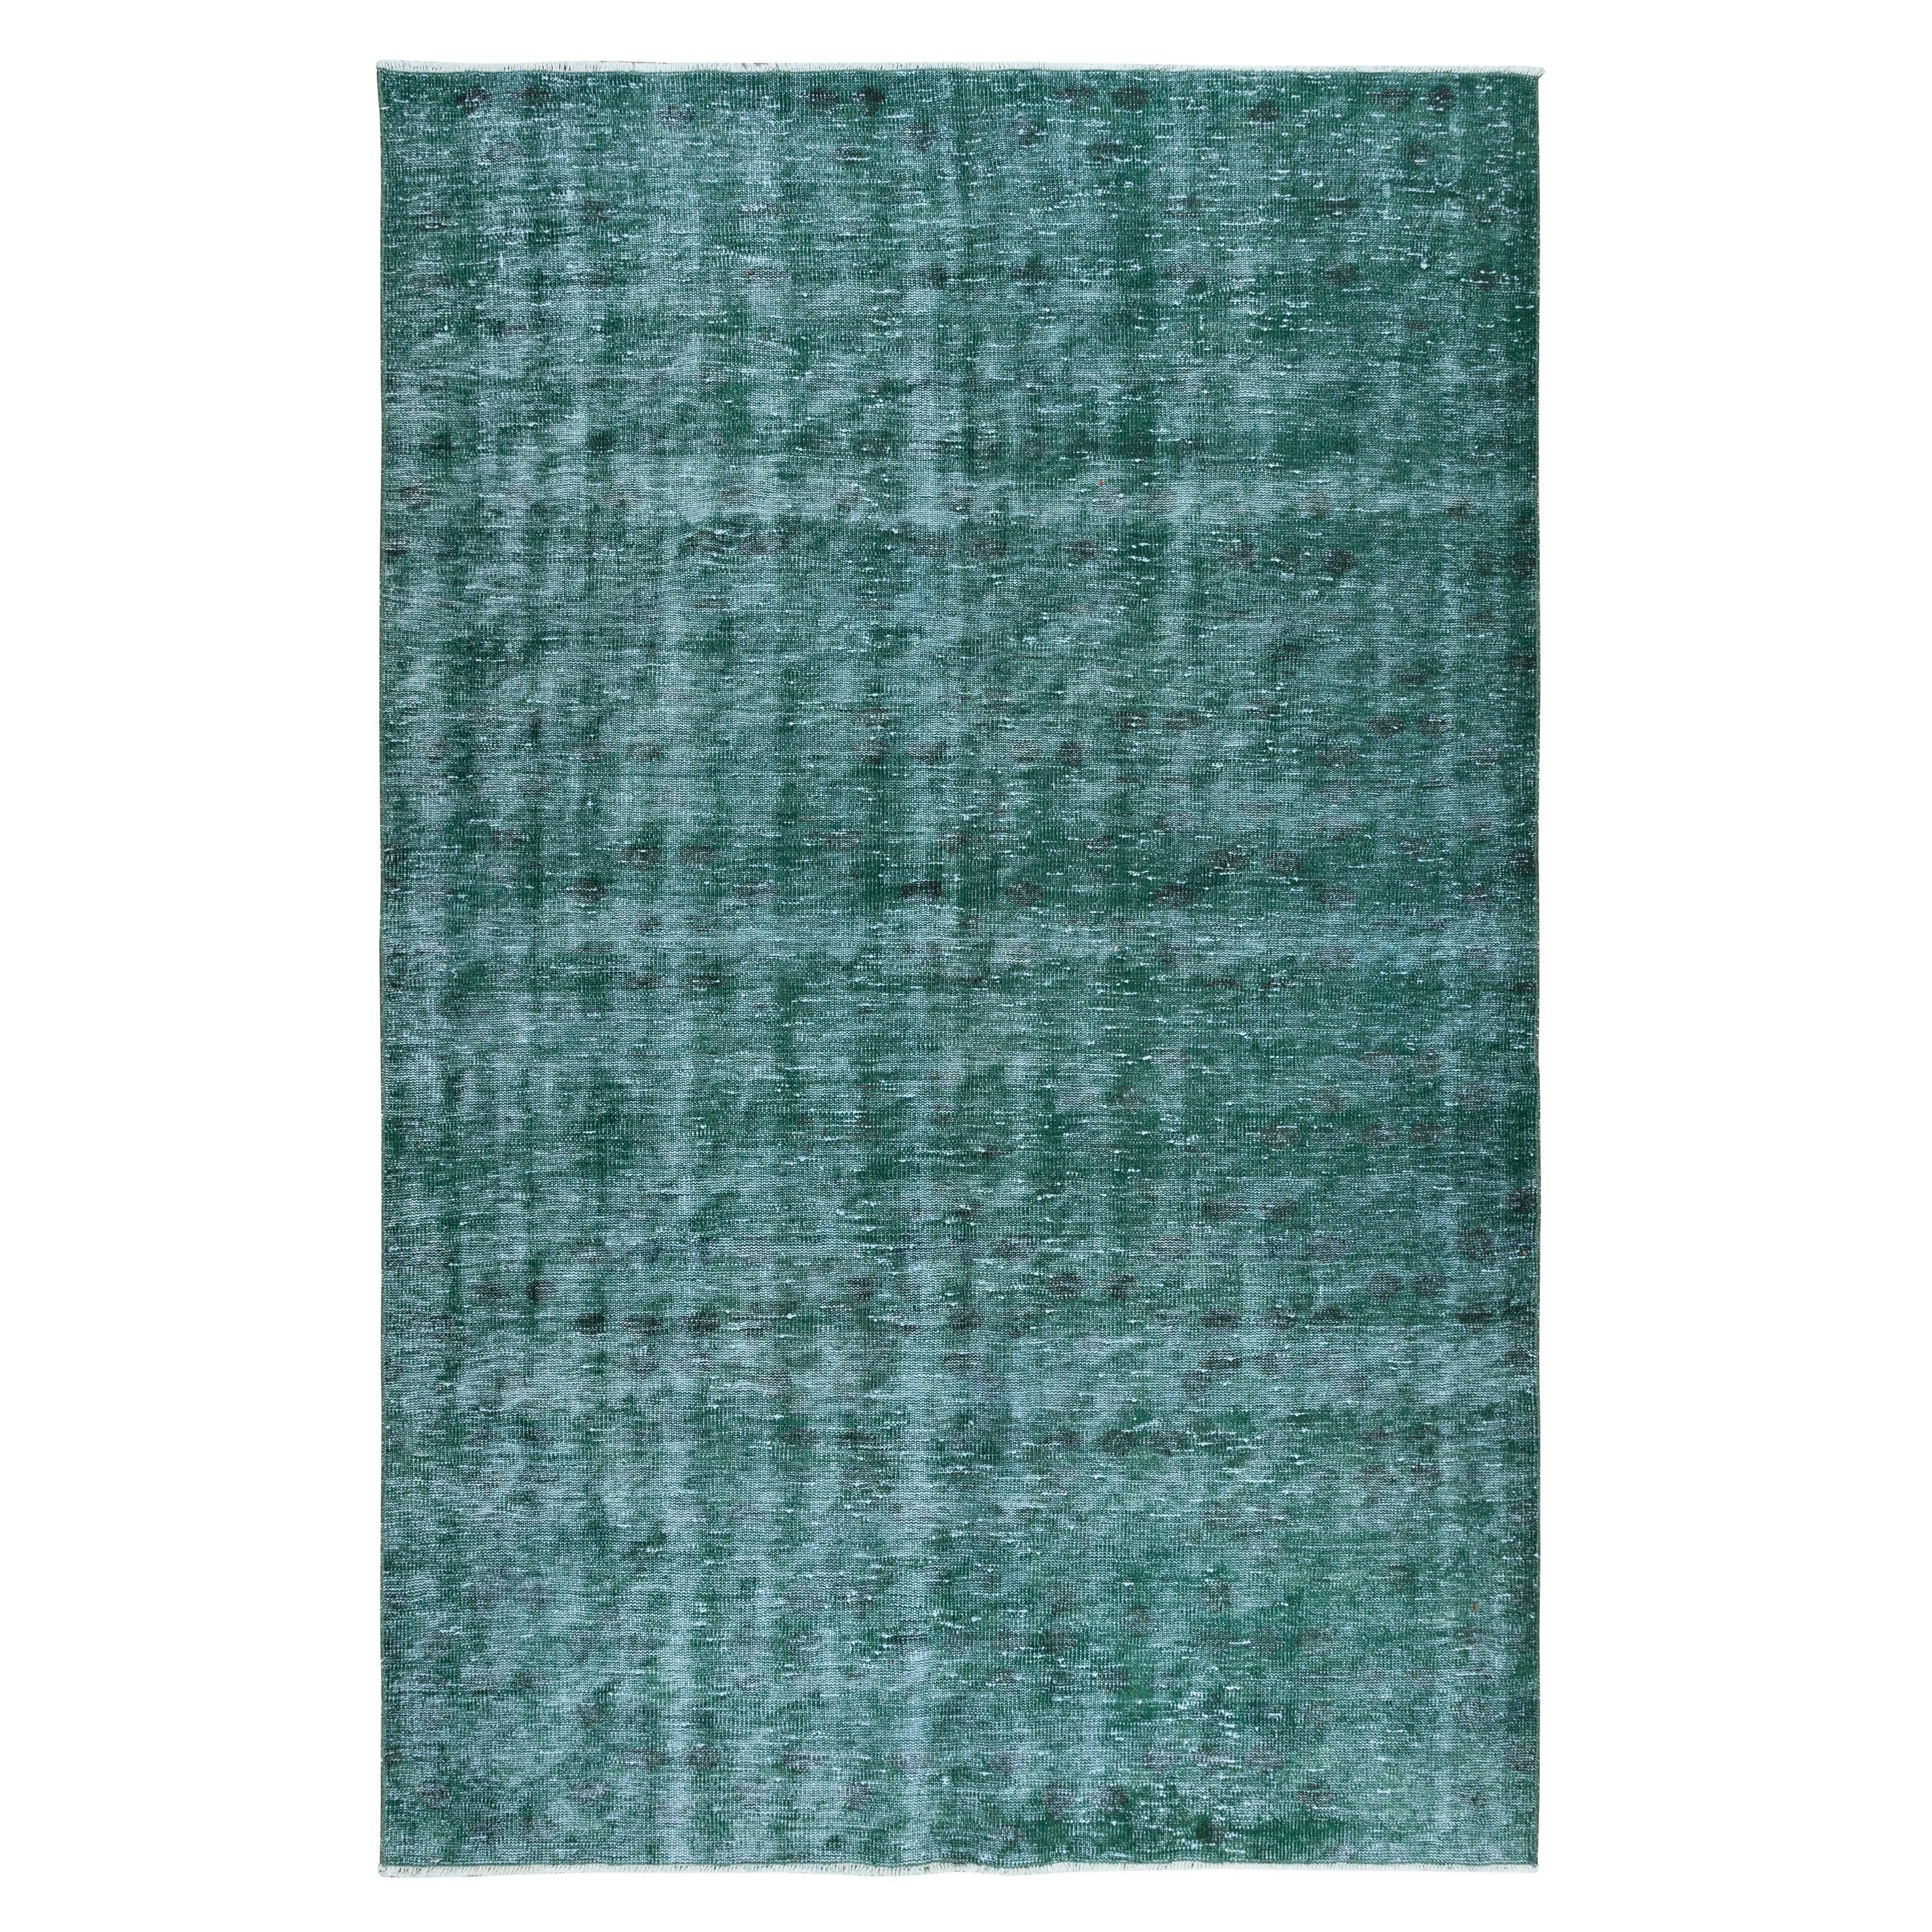 6x9.2 Ft Hand-Made Turkish Area Rug in Green, Contemporary Wool Upcycled Carpet